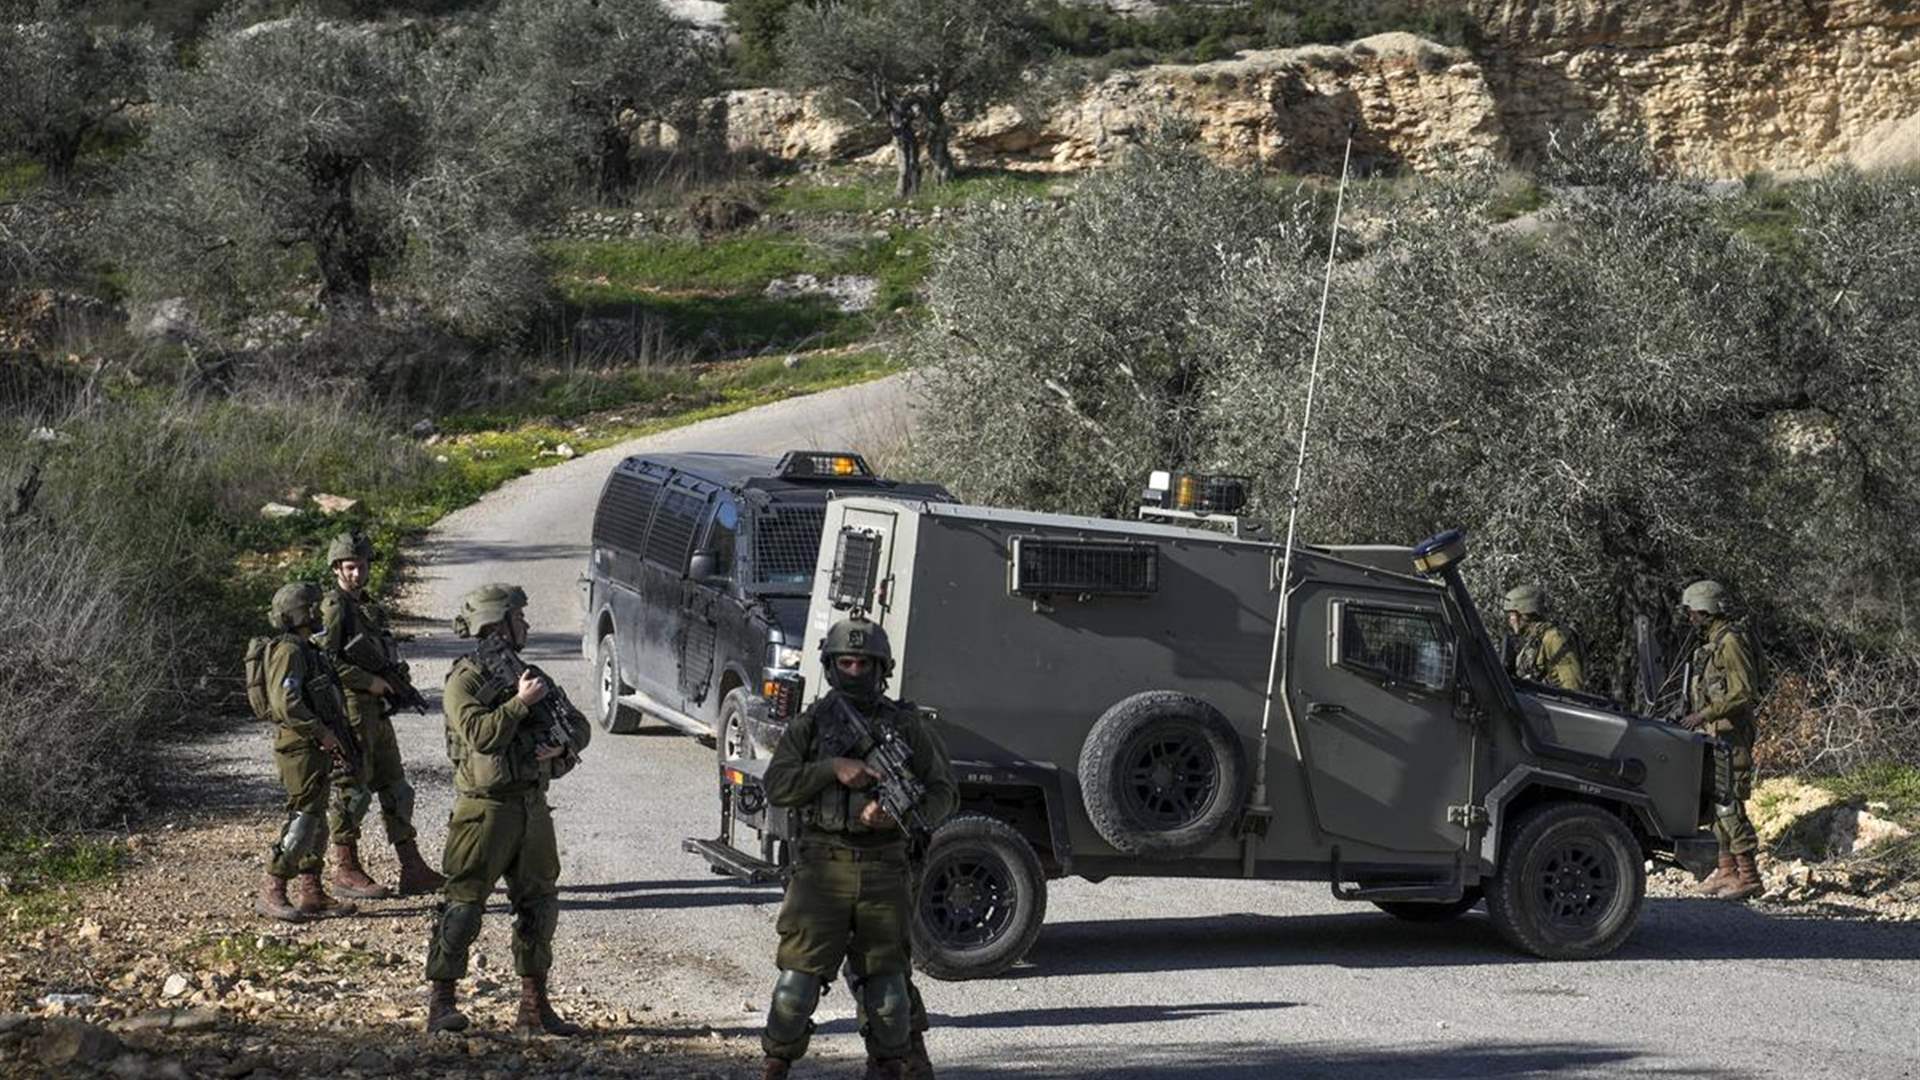 Israeli troops kill Palestinian after attempted stabbing